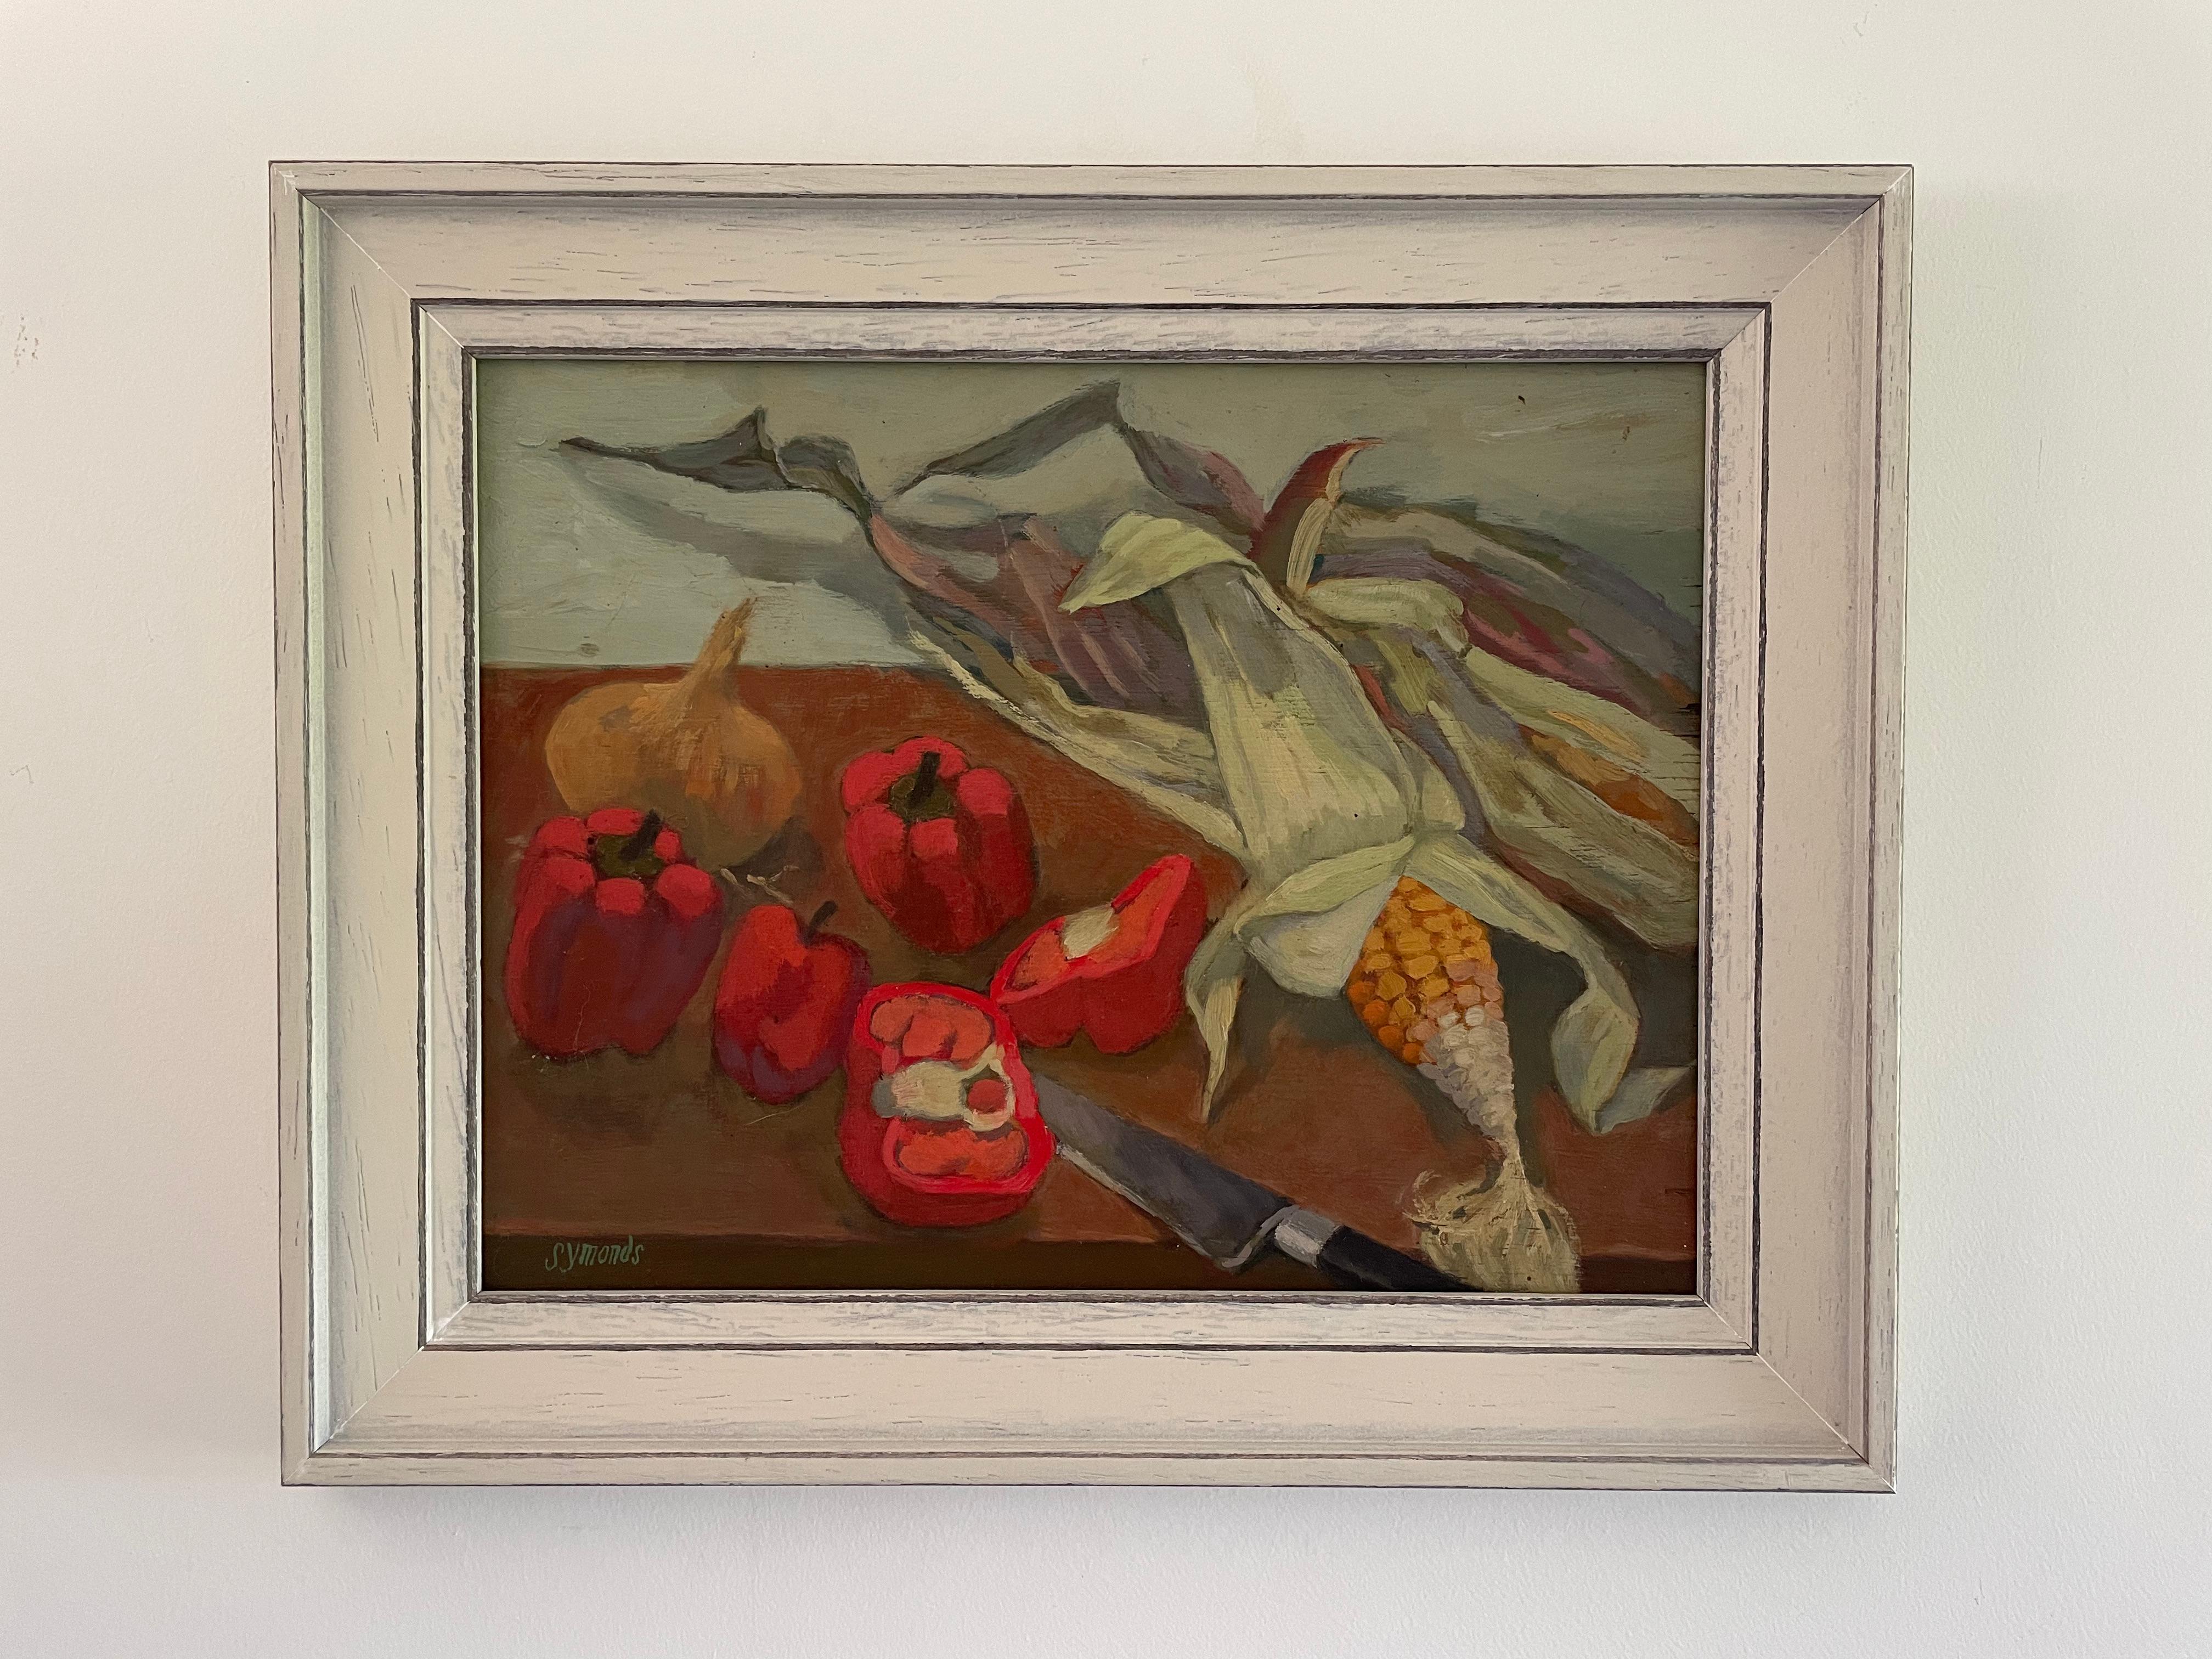 KEN SYMONDS
(1927-2010)

Sweetcorn and Sweet Peppers

Signed l.l.: Symonds; signed, inscribed with title and the artist’s address on the backboard
Oil on board
Framed

24 by 31 cm., 9 ½ by 12 ¼ in.
(frame size 33 by 40.5 cm., 13 by 16